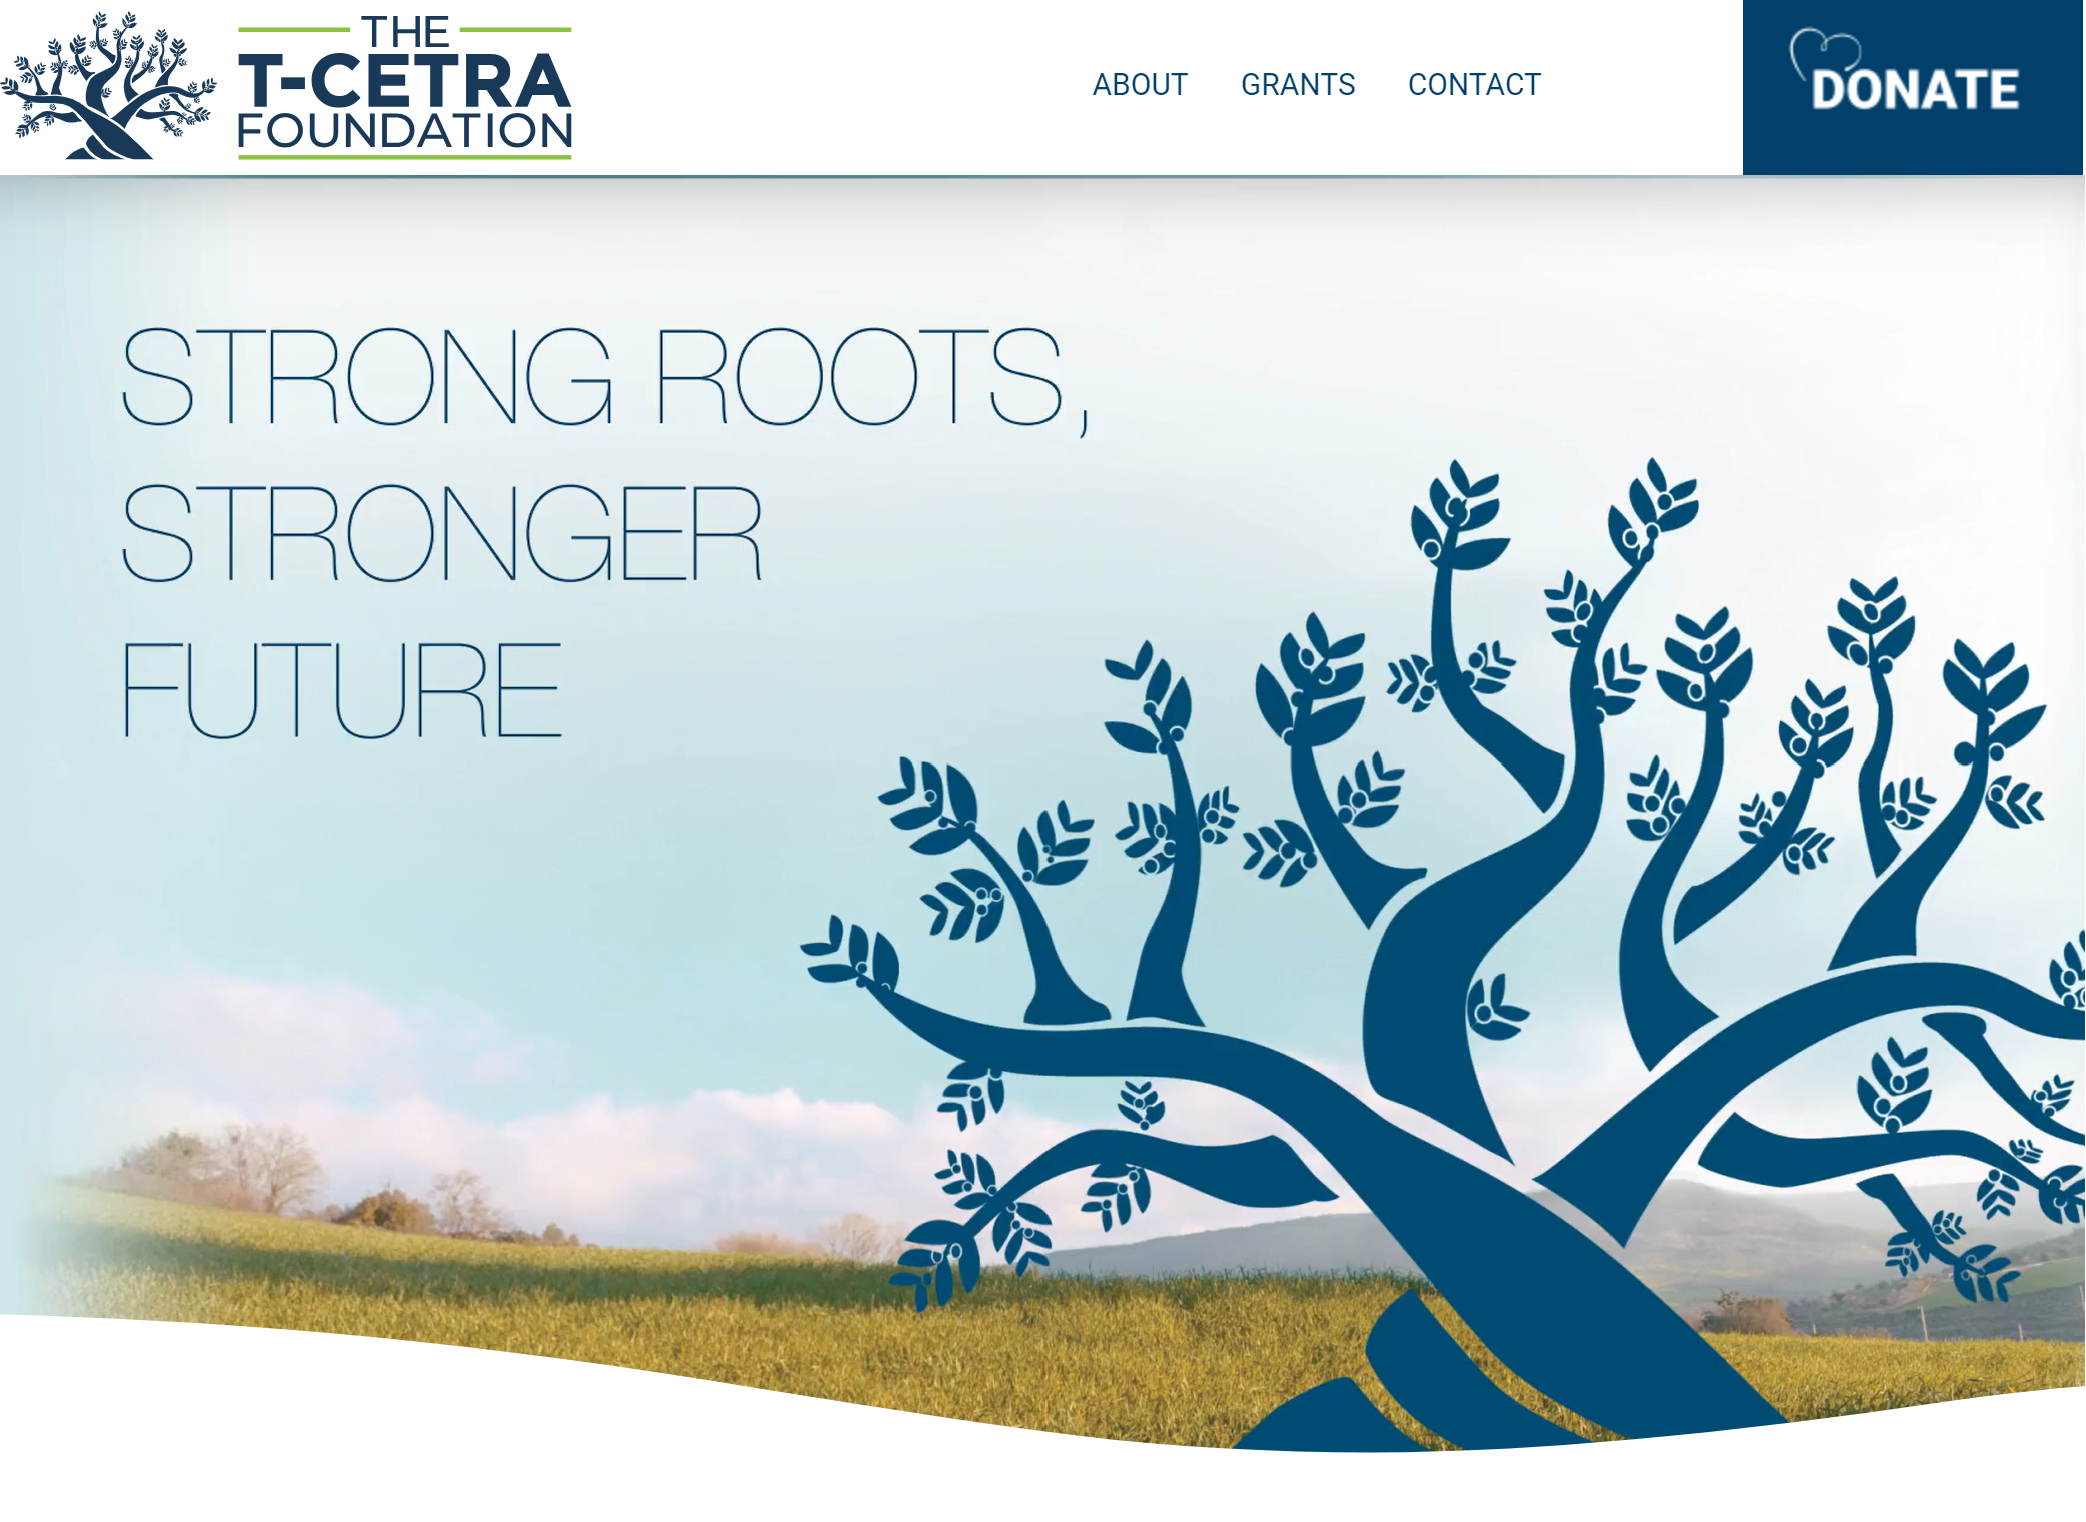 The T-CETRA Foundation